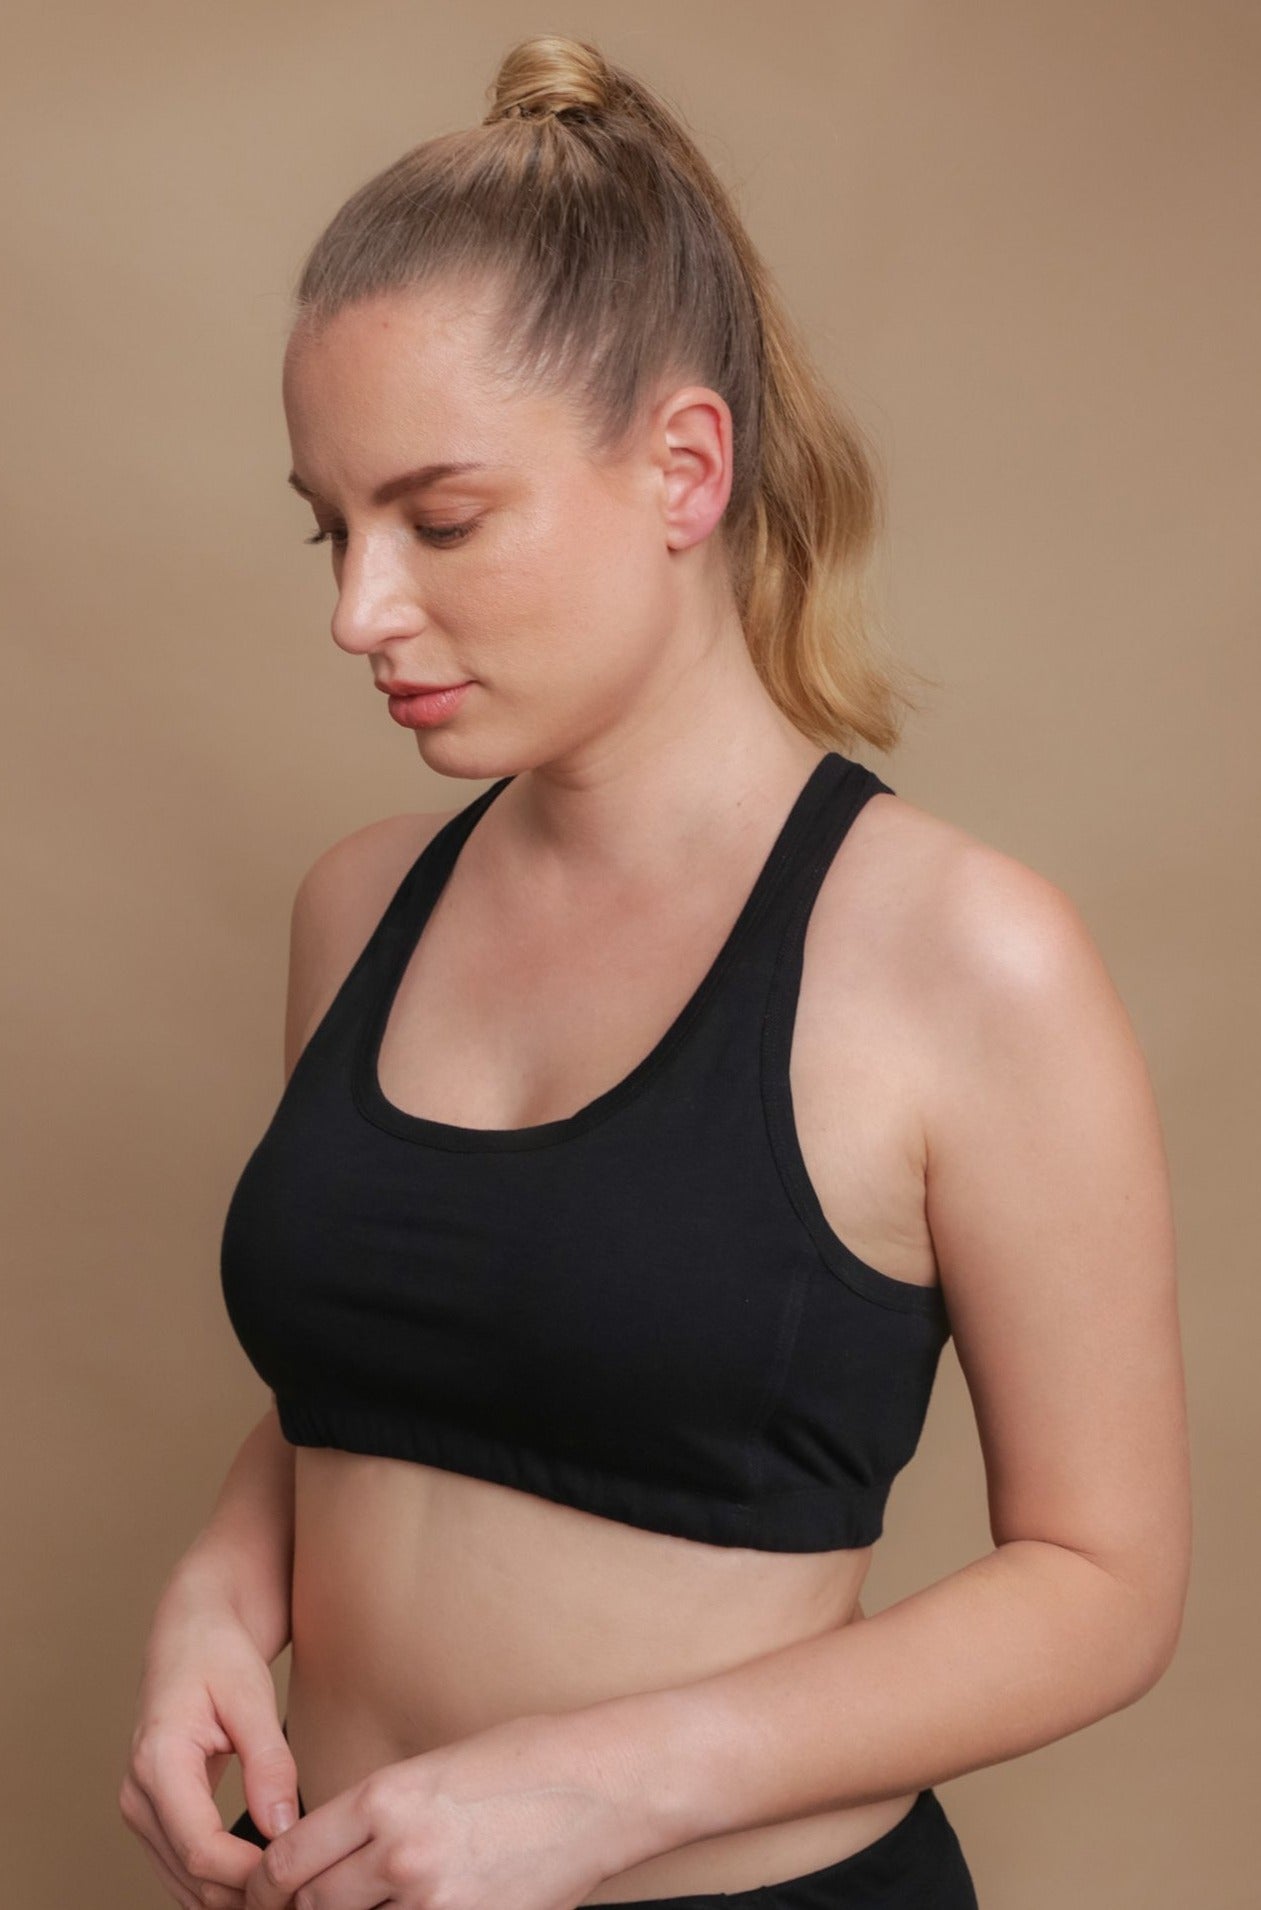 7 common Sports Bra myths busted - by a Sports Bra Fitter! – She